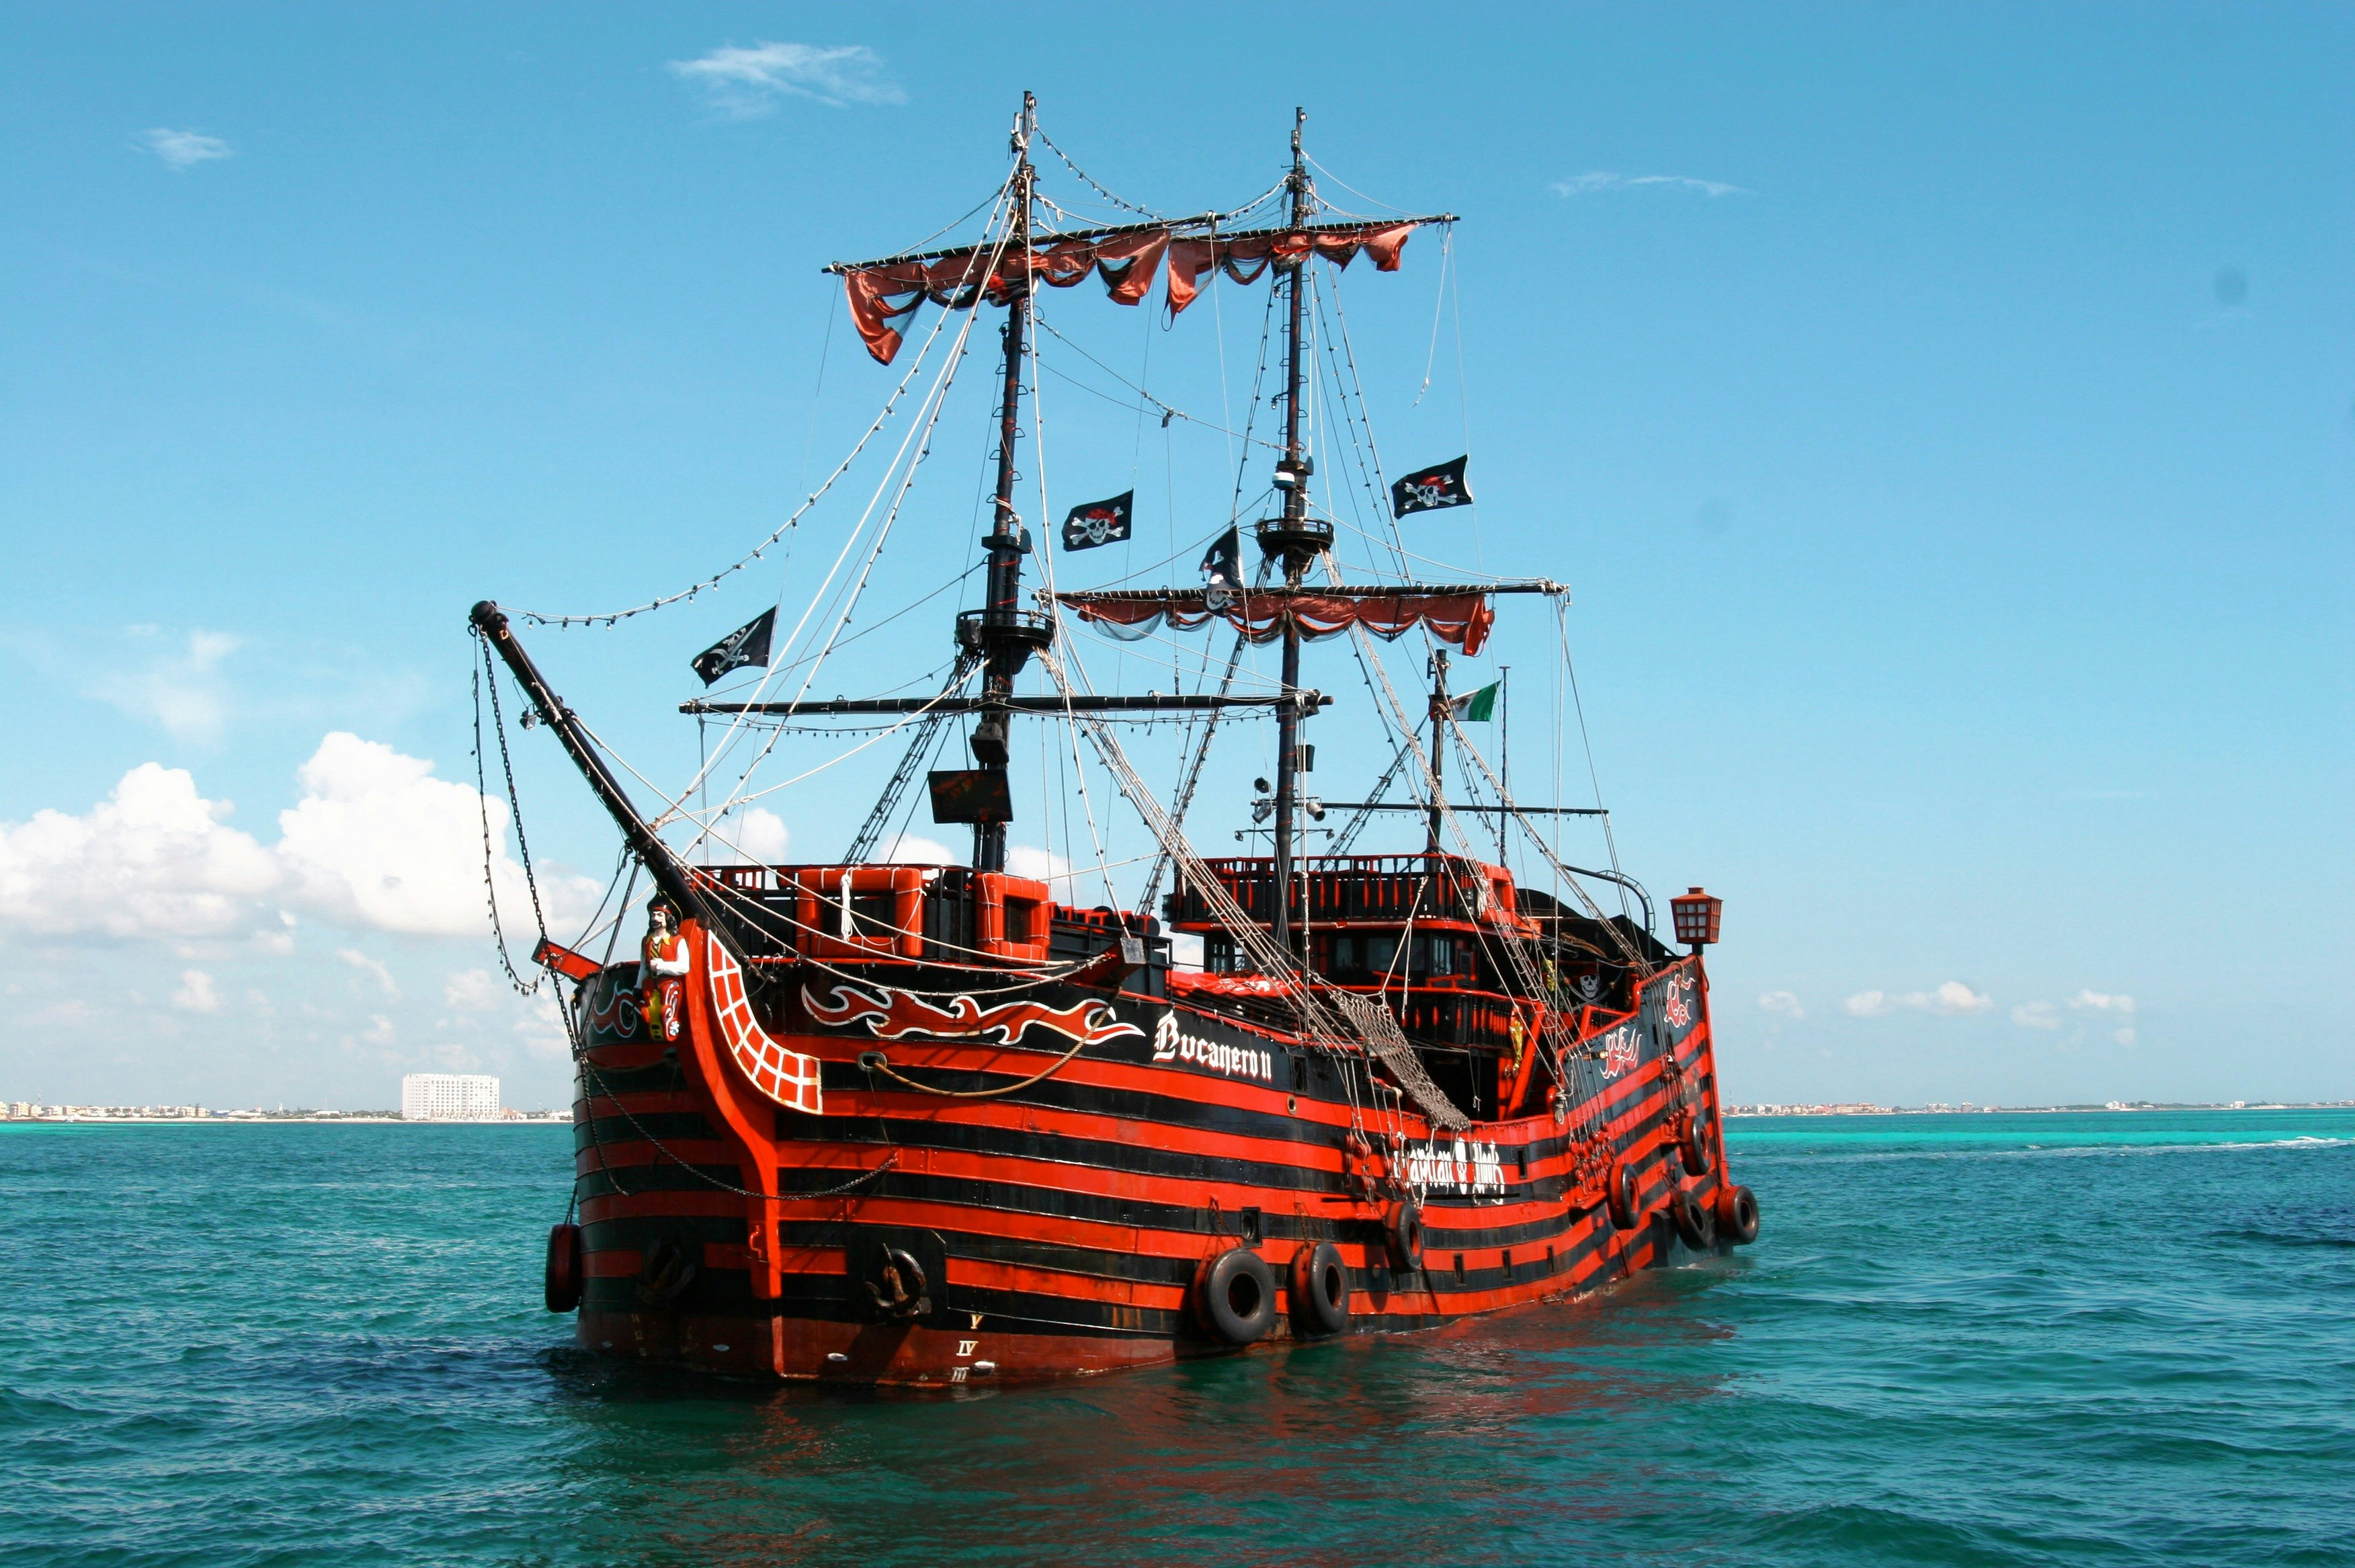 The Pirate Ship at John's Pass in Madeira Beach